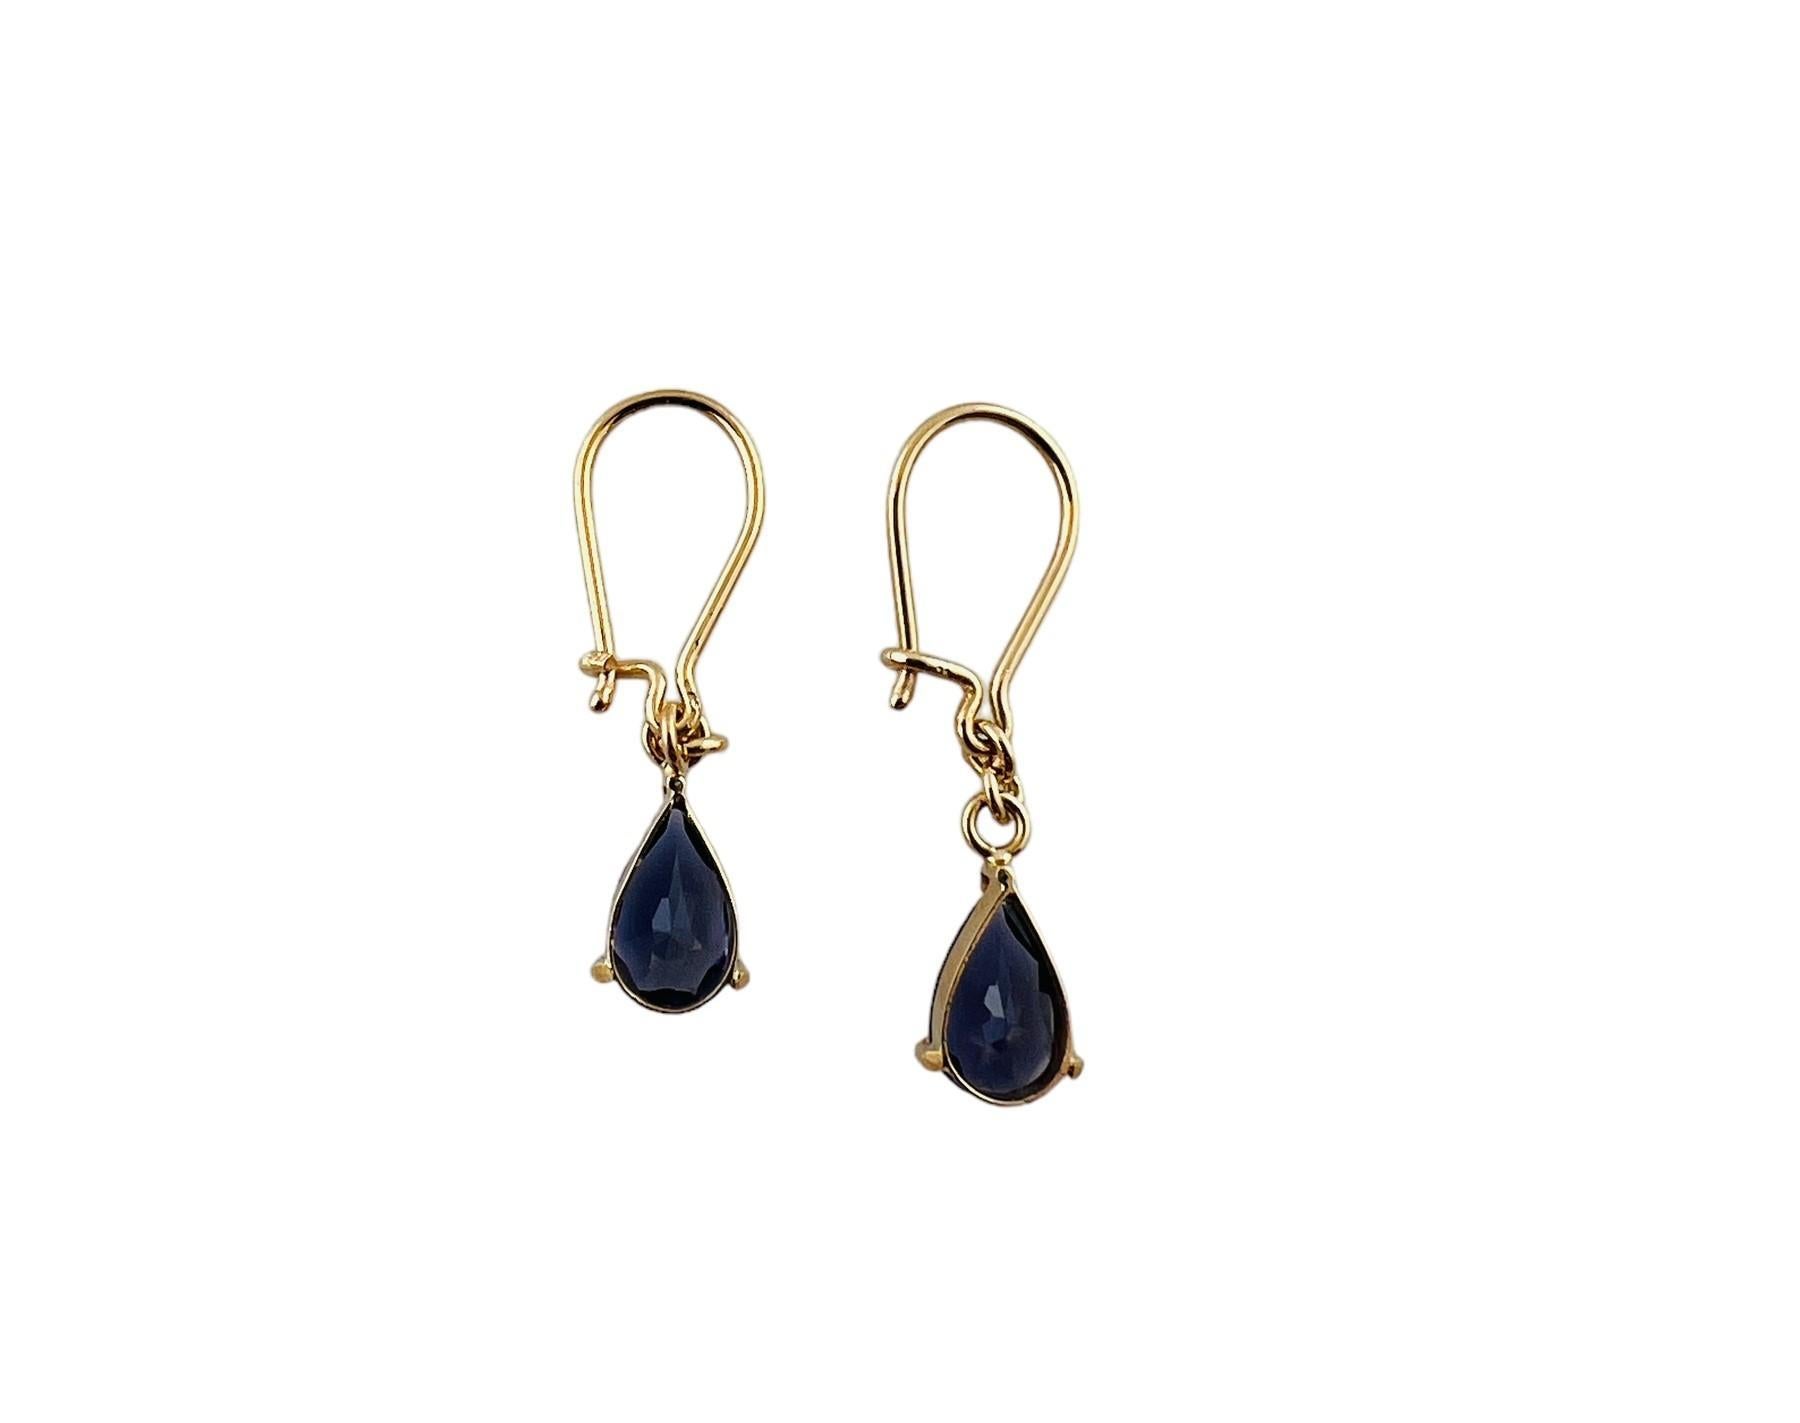 10K Yellow Gold Purple Tanzanite Drop Earrings

These beautiful drop earrings are set in 10K yellow gold

Each earring is set with 1 faceted pear shaped purple tanzanite

Size approx. 27mm in length  - 1